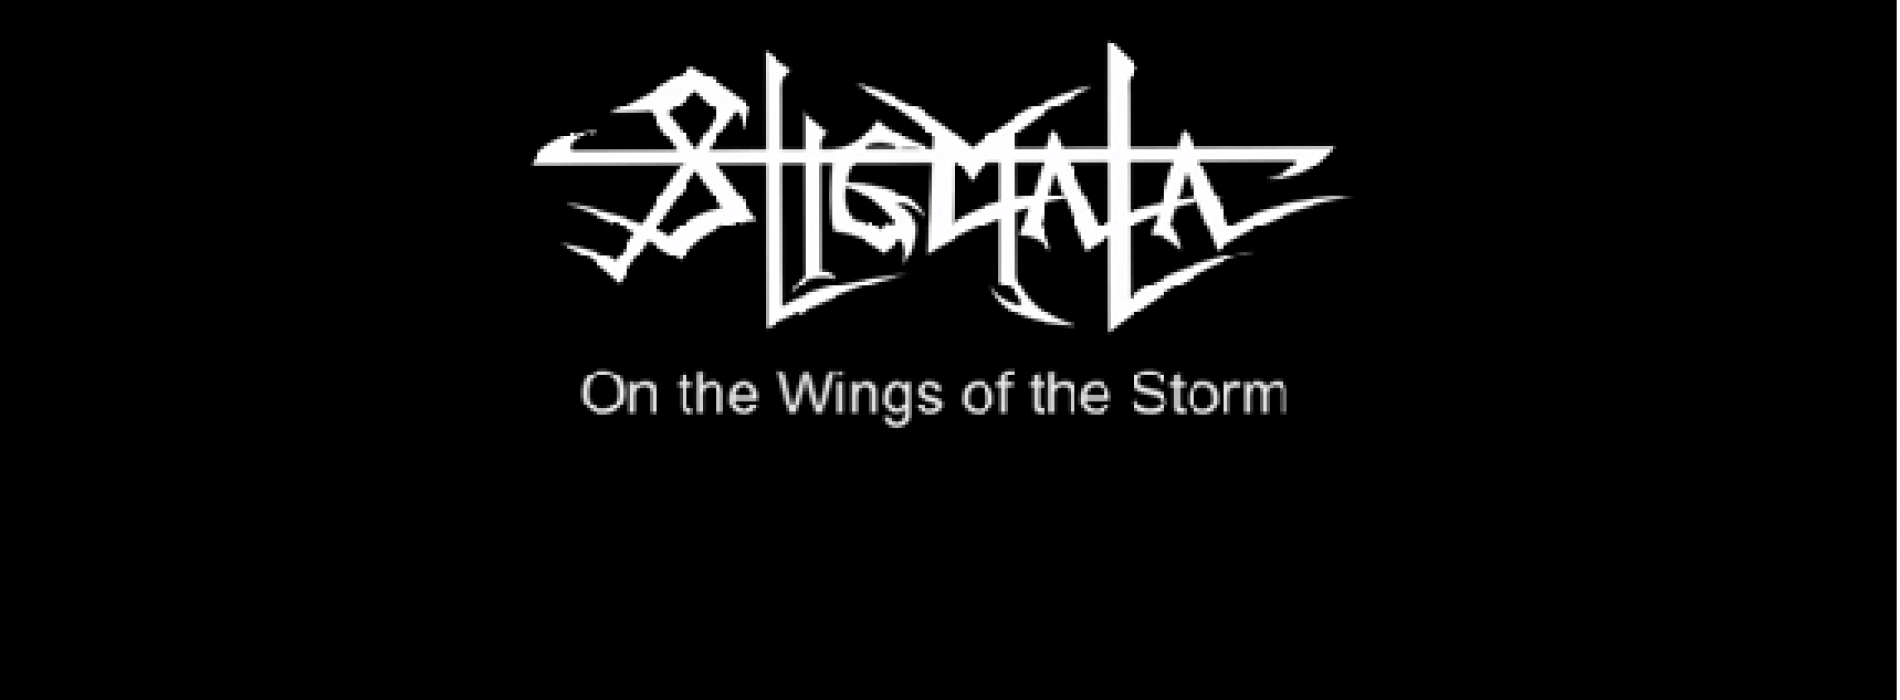 Stigmata: On The Wings of the Storm (Official Video)